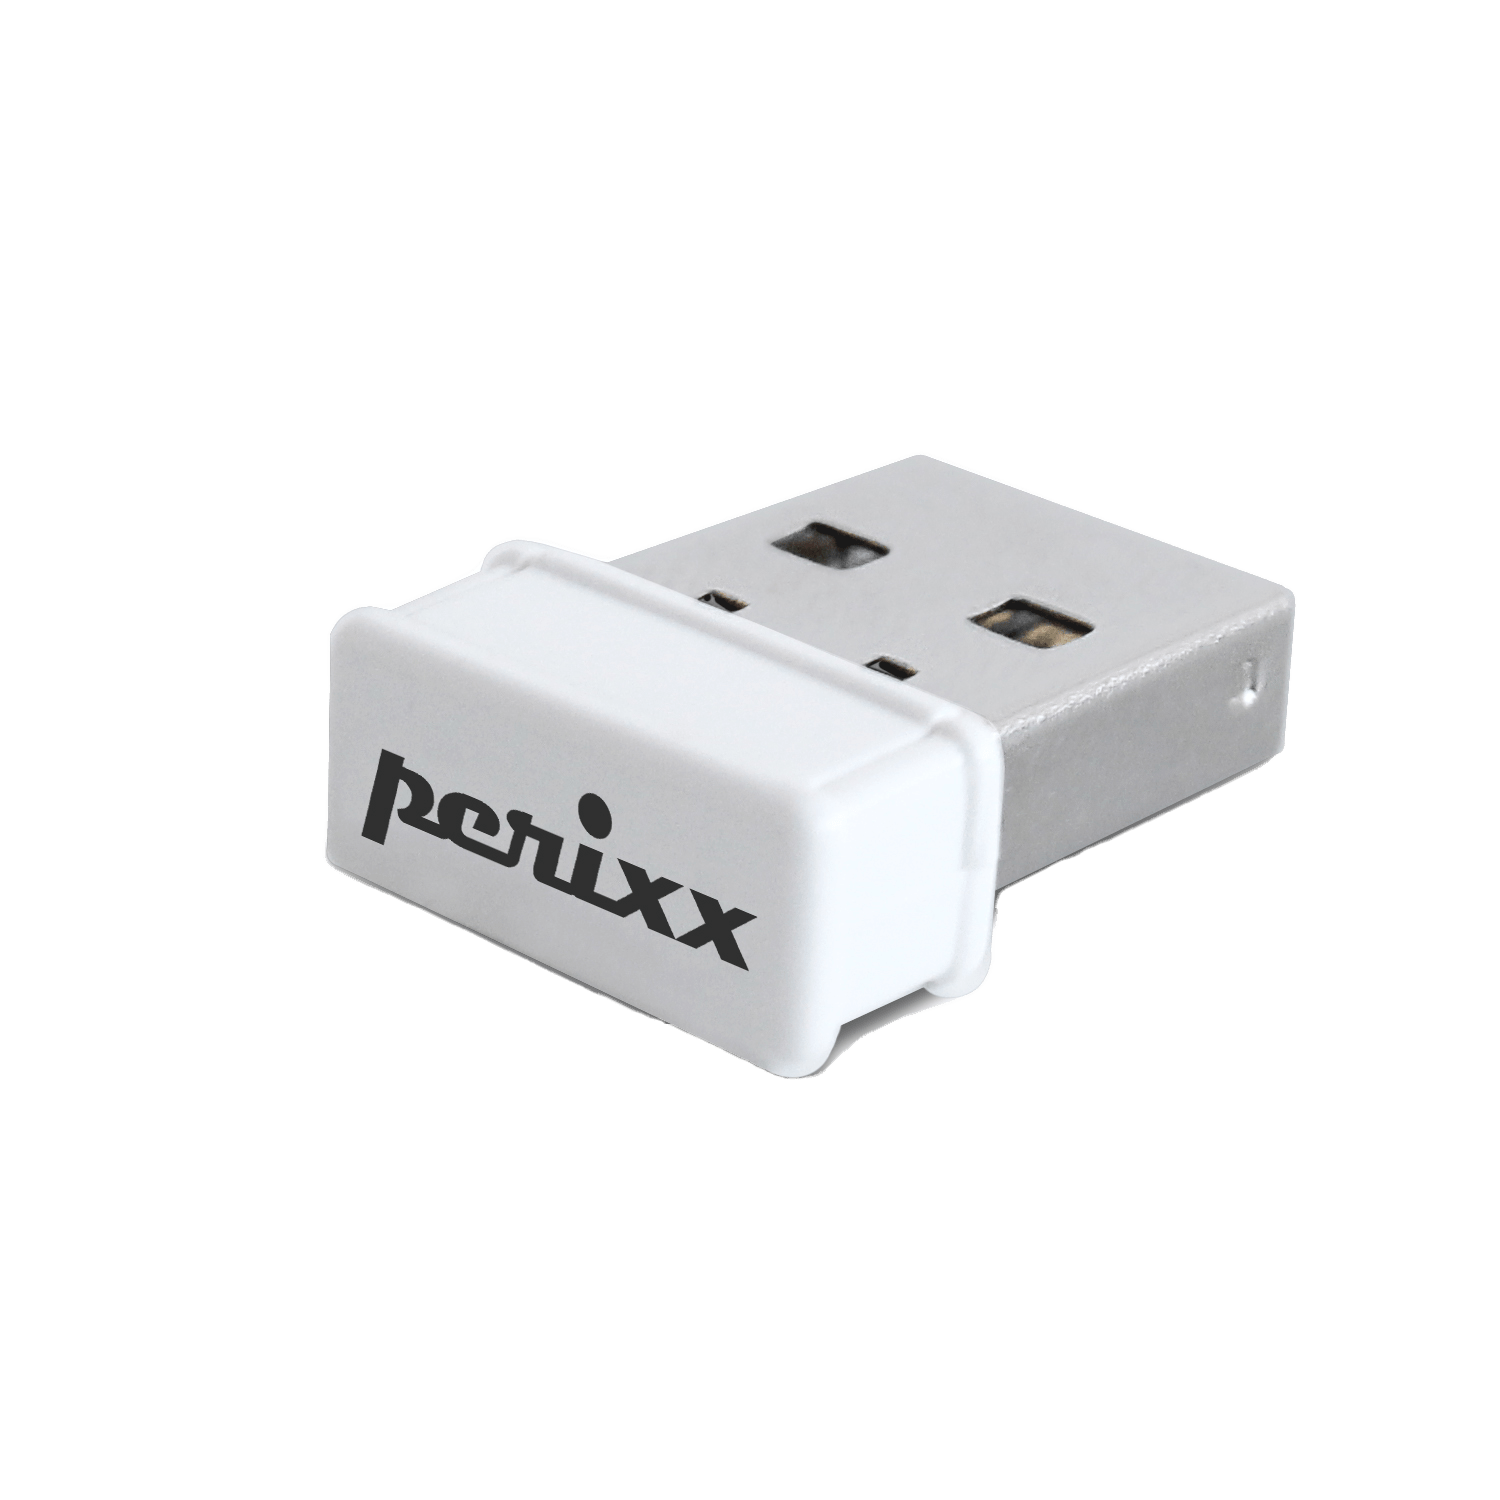 USB dongle receiver for PERIDUO-712-White - Perixx Europe